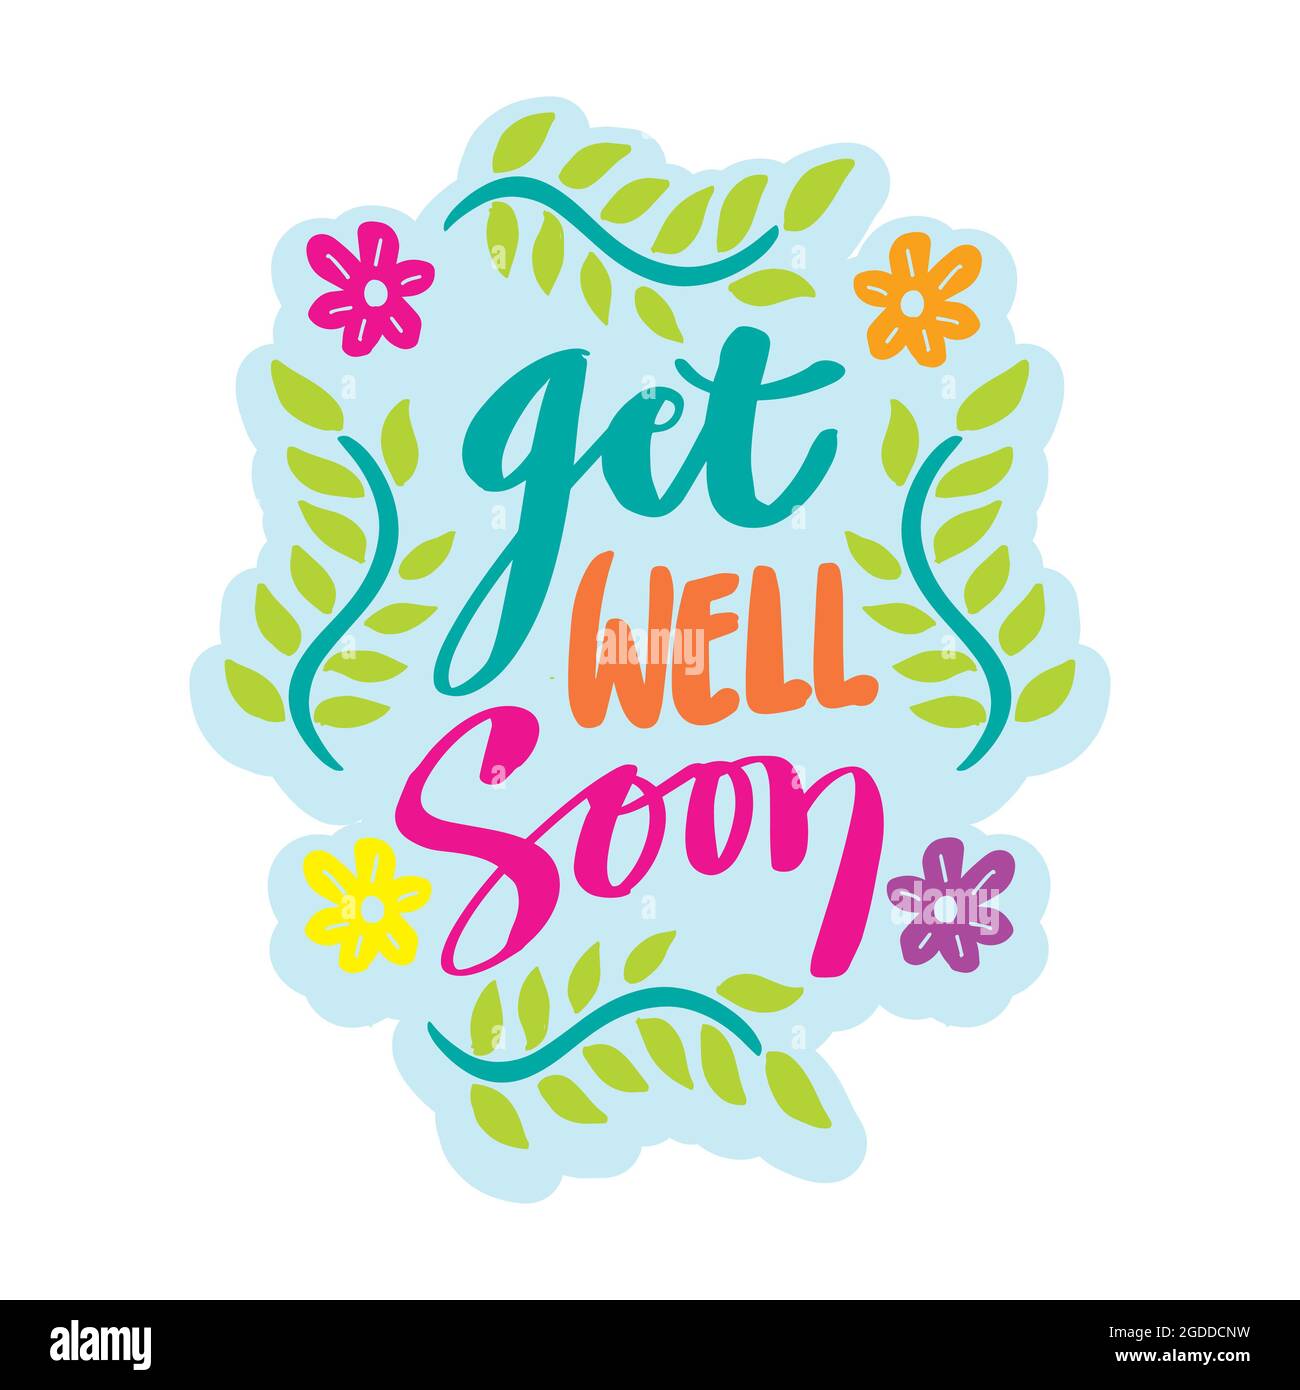 Get well soon hand lettering. Greeting card concept. Get well soon hand lettering. Greeting card concept. Stock Photo